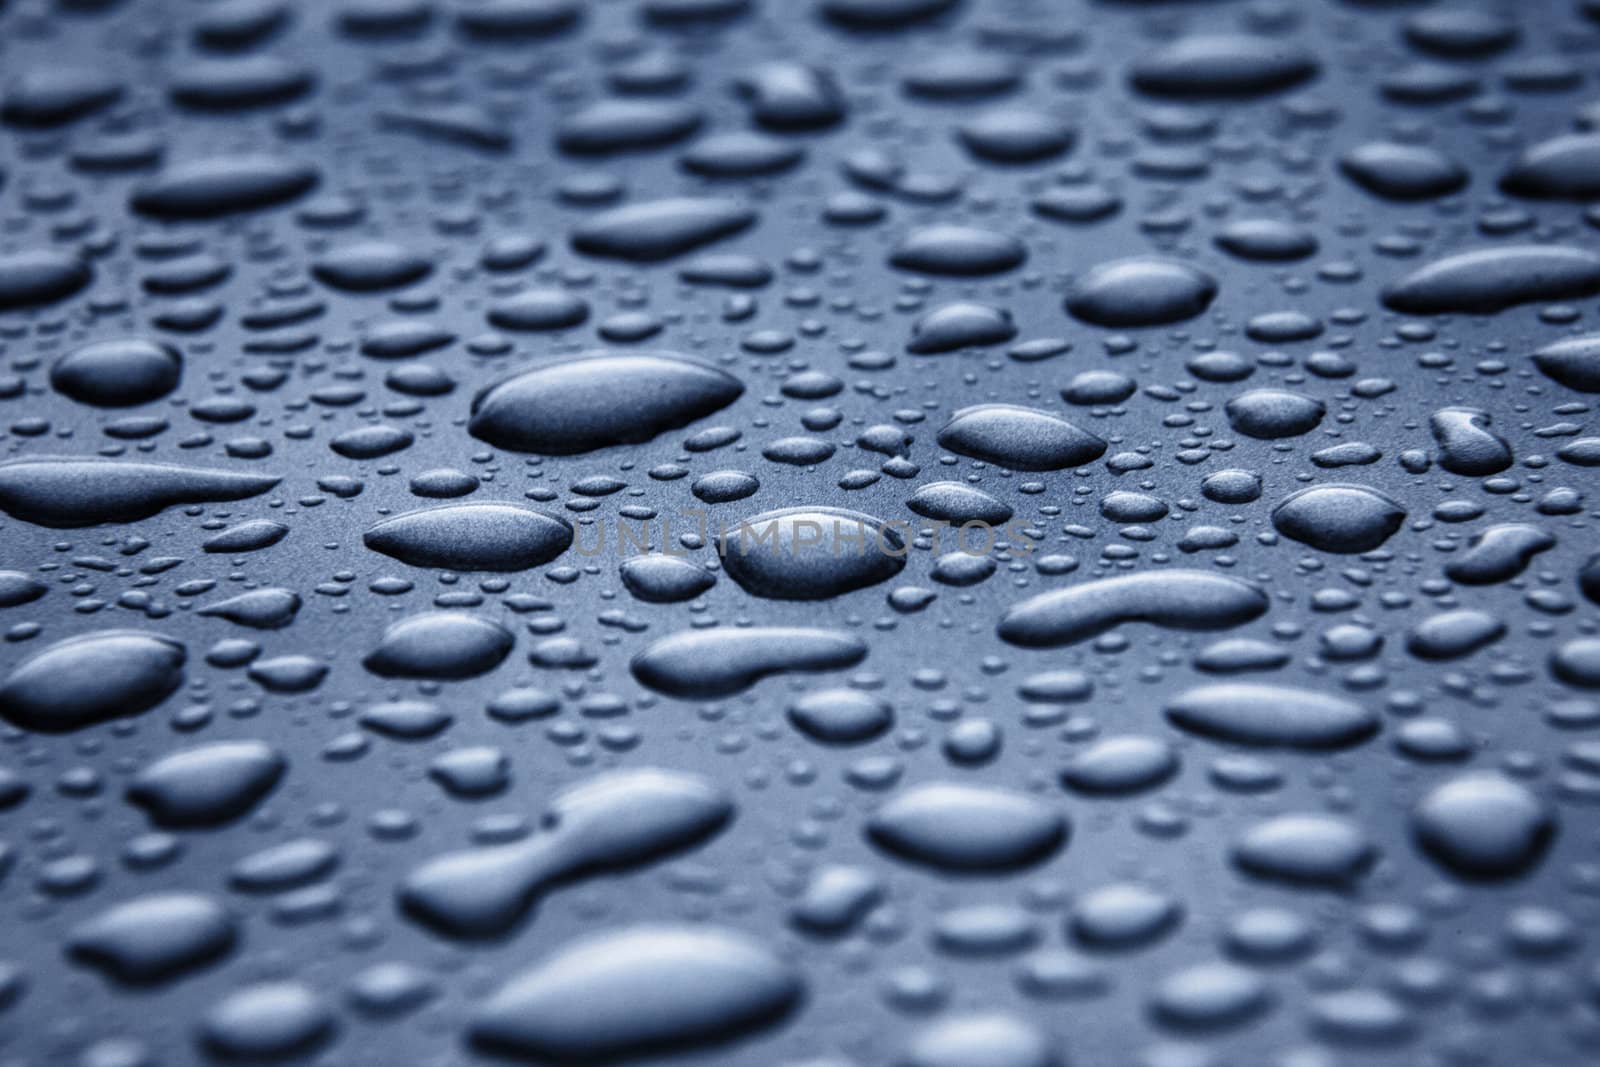 Water on a metal surface by monkeystock